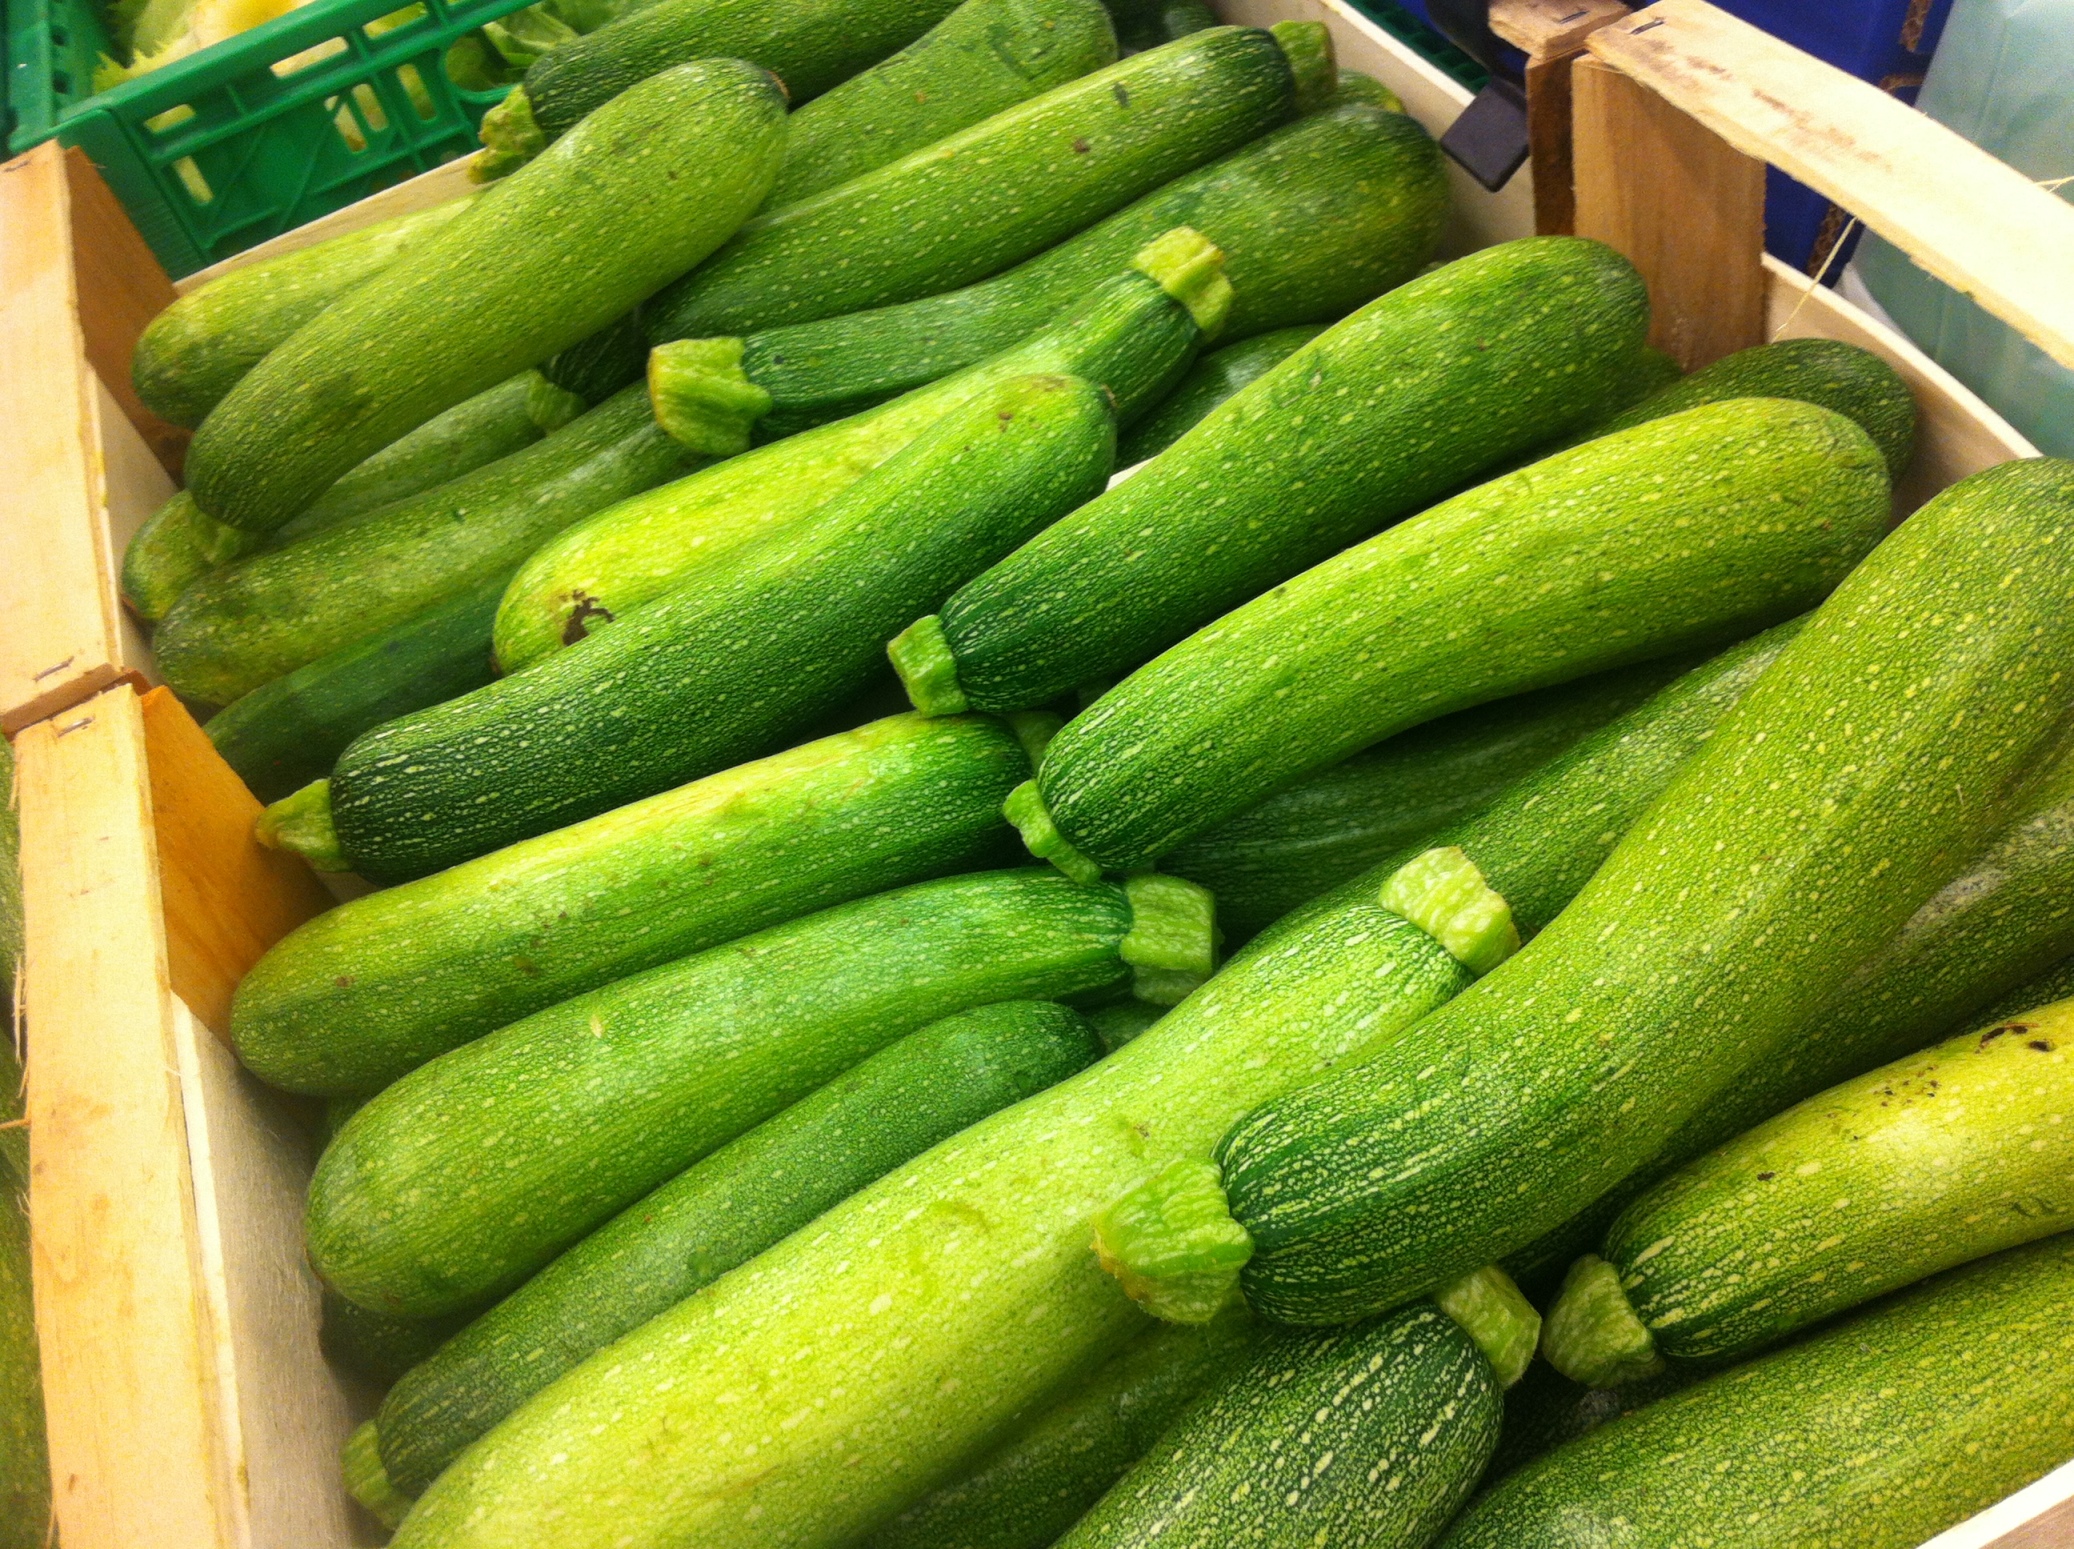 Zucchine, Italian staple food. It's in most dishes and grows everywhere.